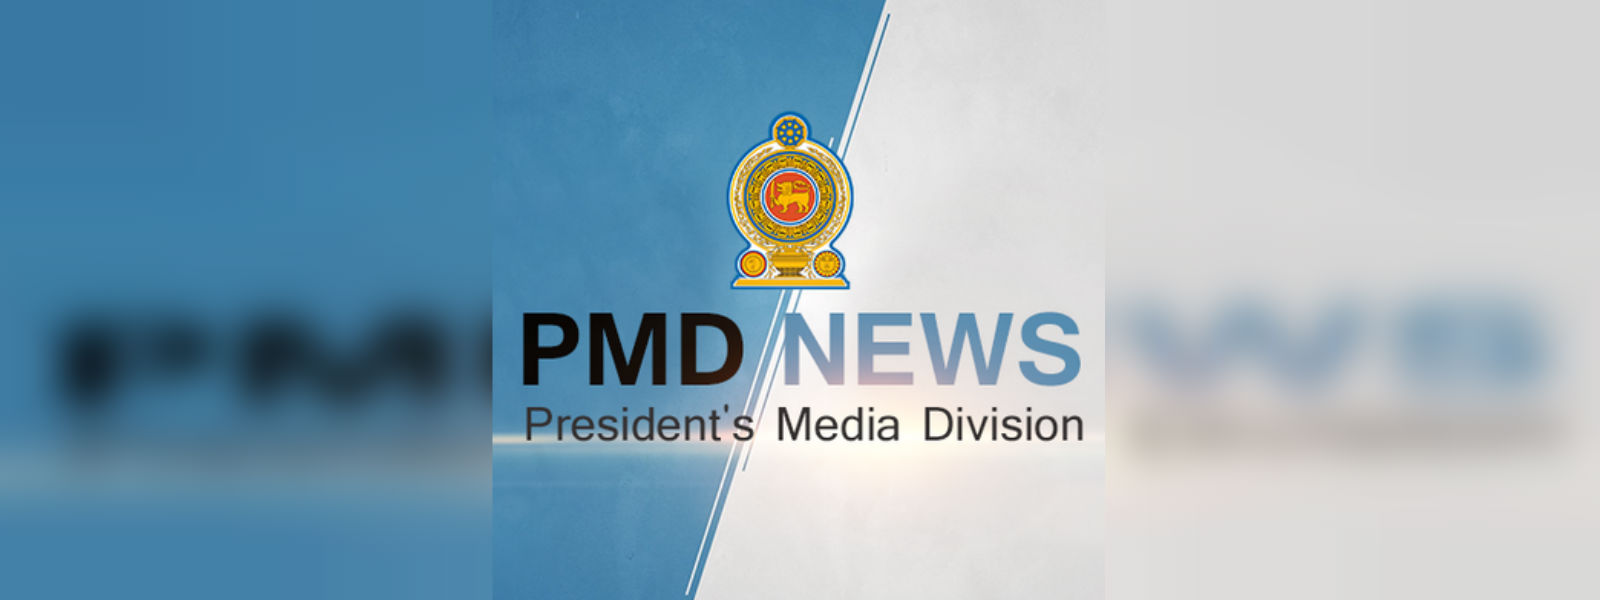 CID launches an investigation regarding a fake letter with the official letter head of the President’s Media Division on social media